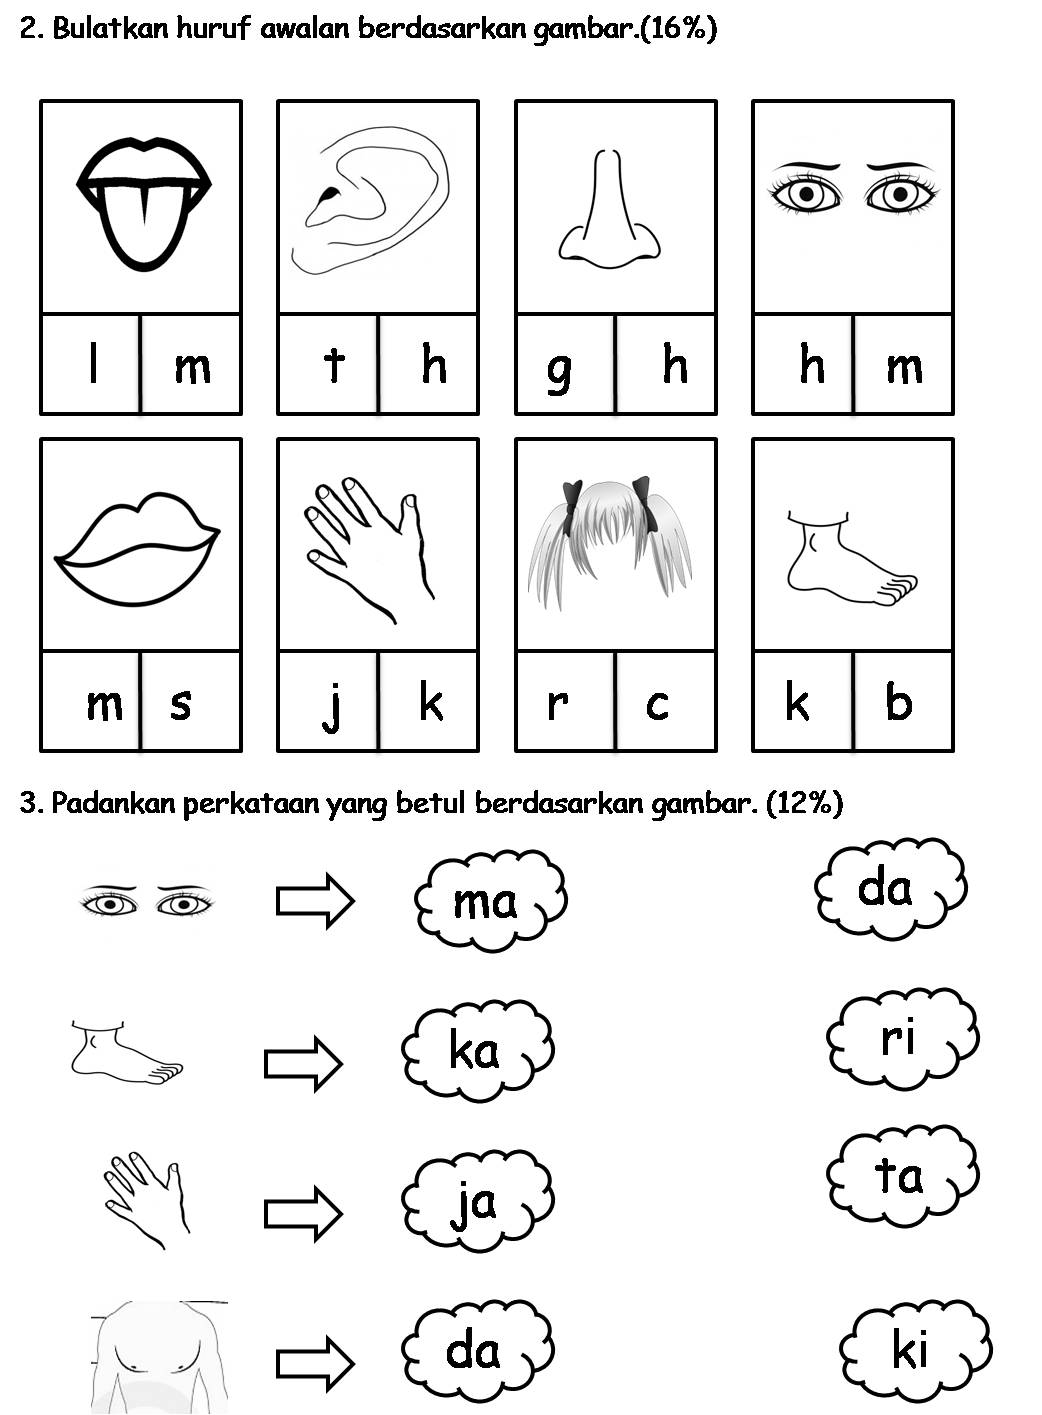 Welcome To Teacher Gesscy Site Preschool 5 And 6 Years Old Sample Question Exam Bahasa Malaysia